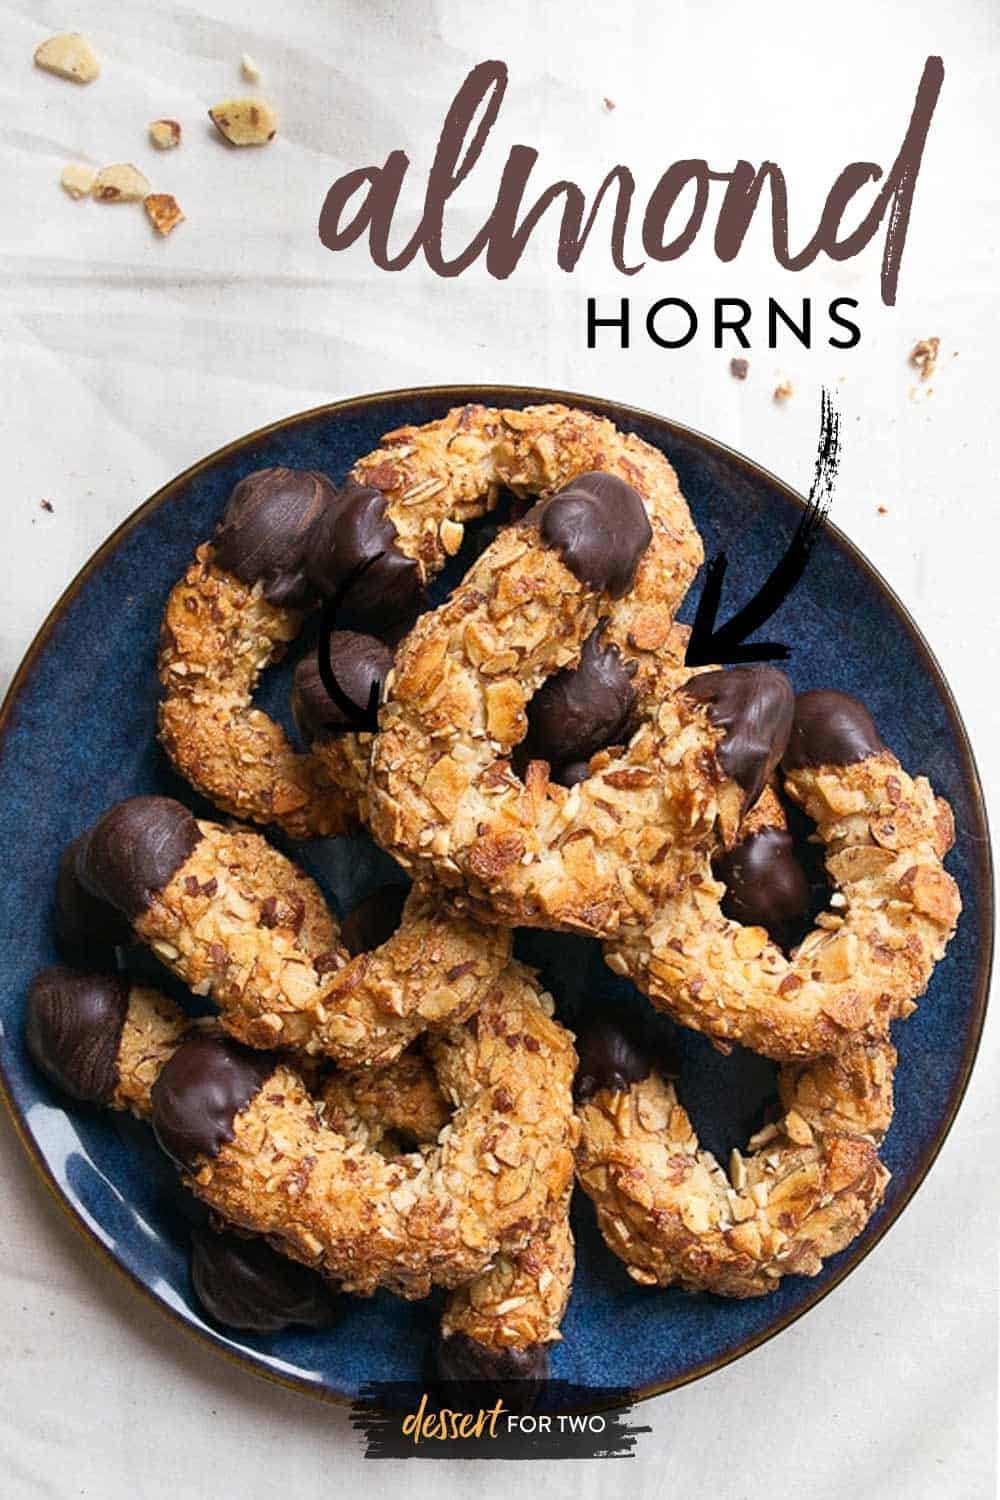 Almond horns: Chocolate dipped almond horn cookies. Naturally gluten free, made with marzipan, almond flour and egg whites.